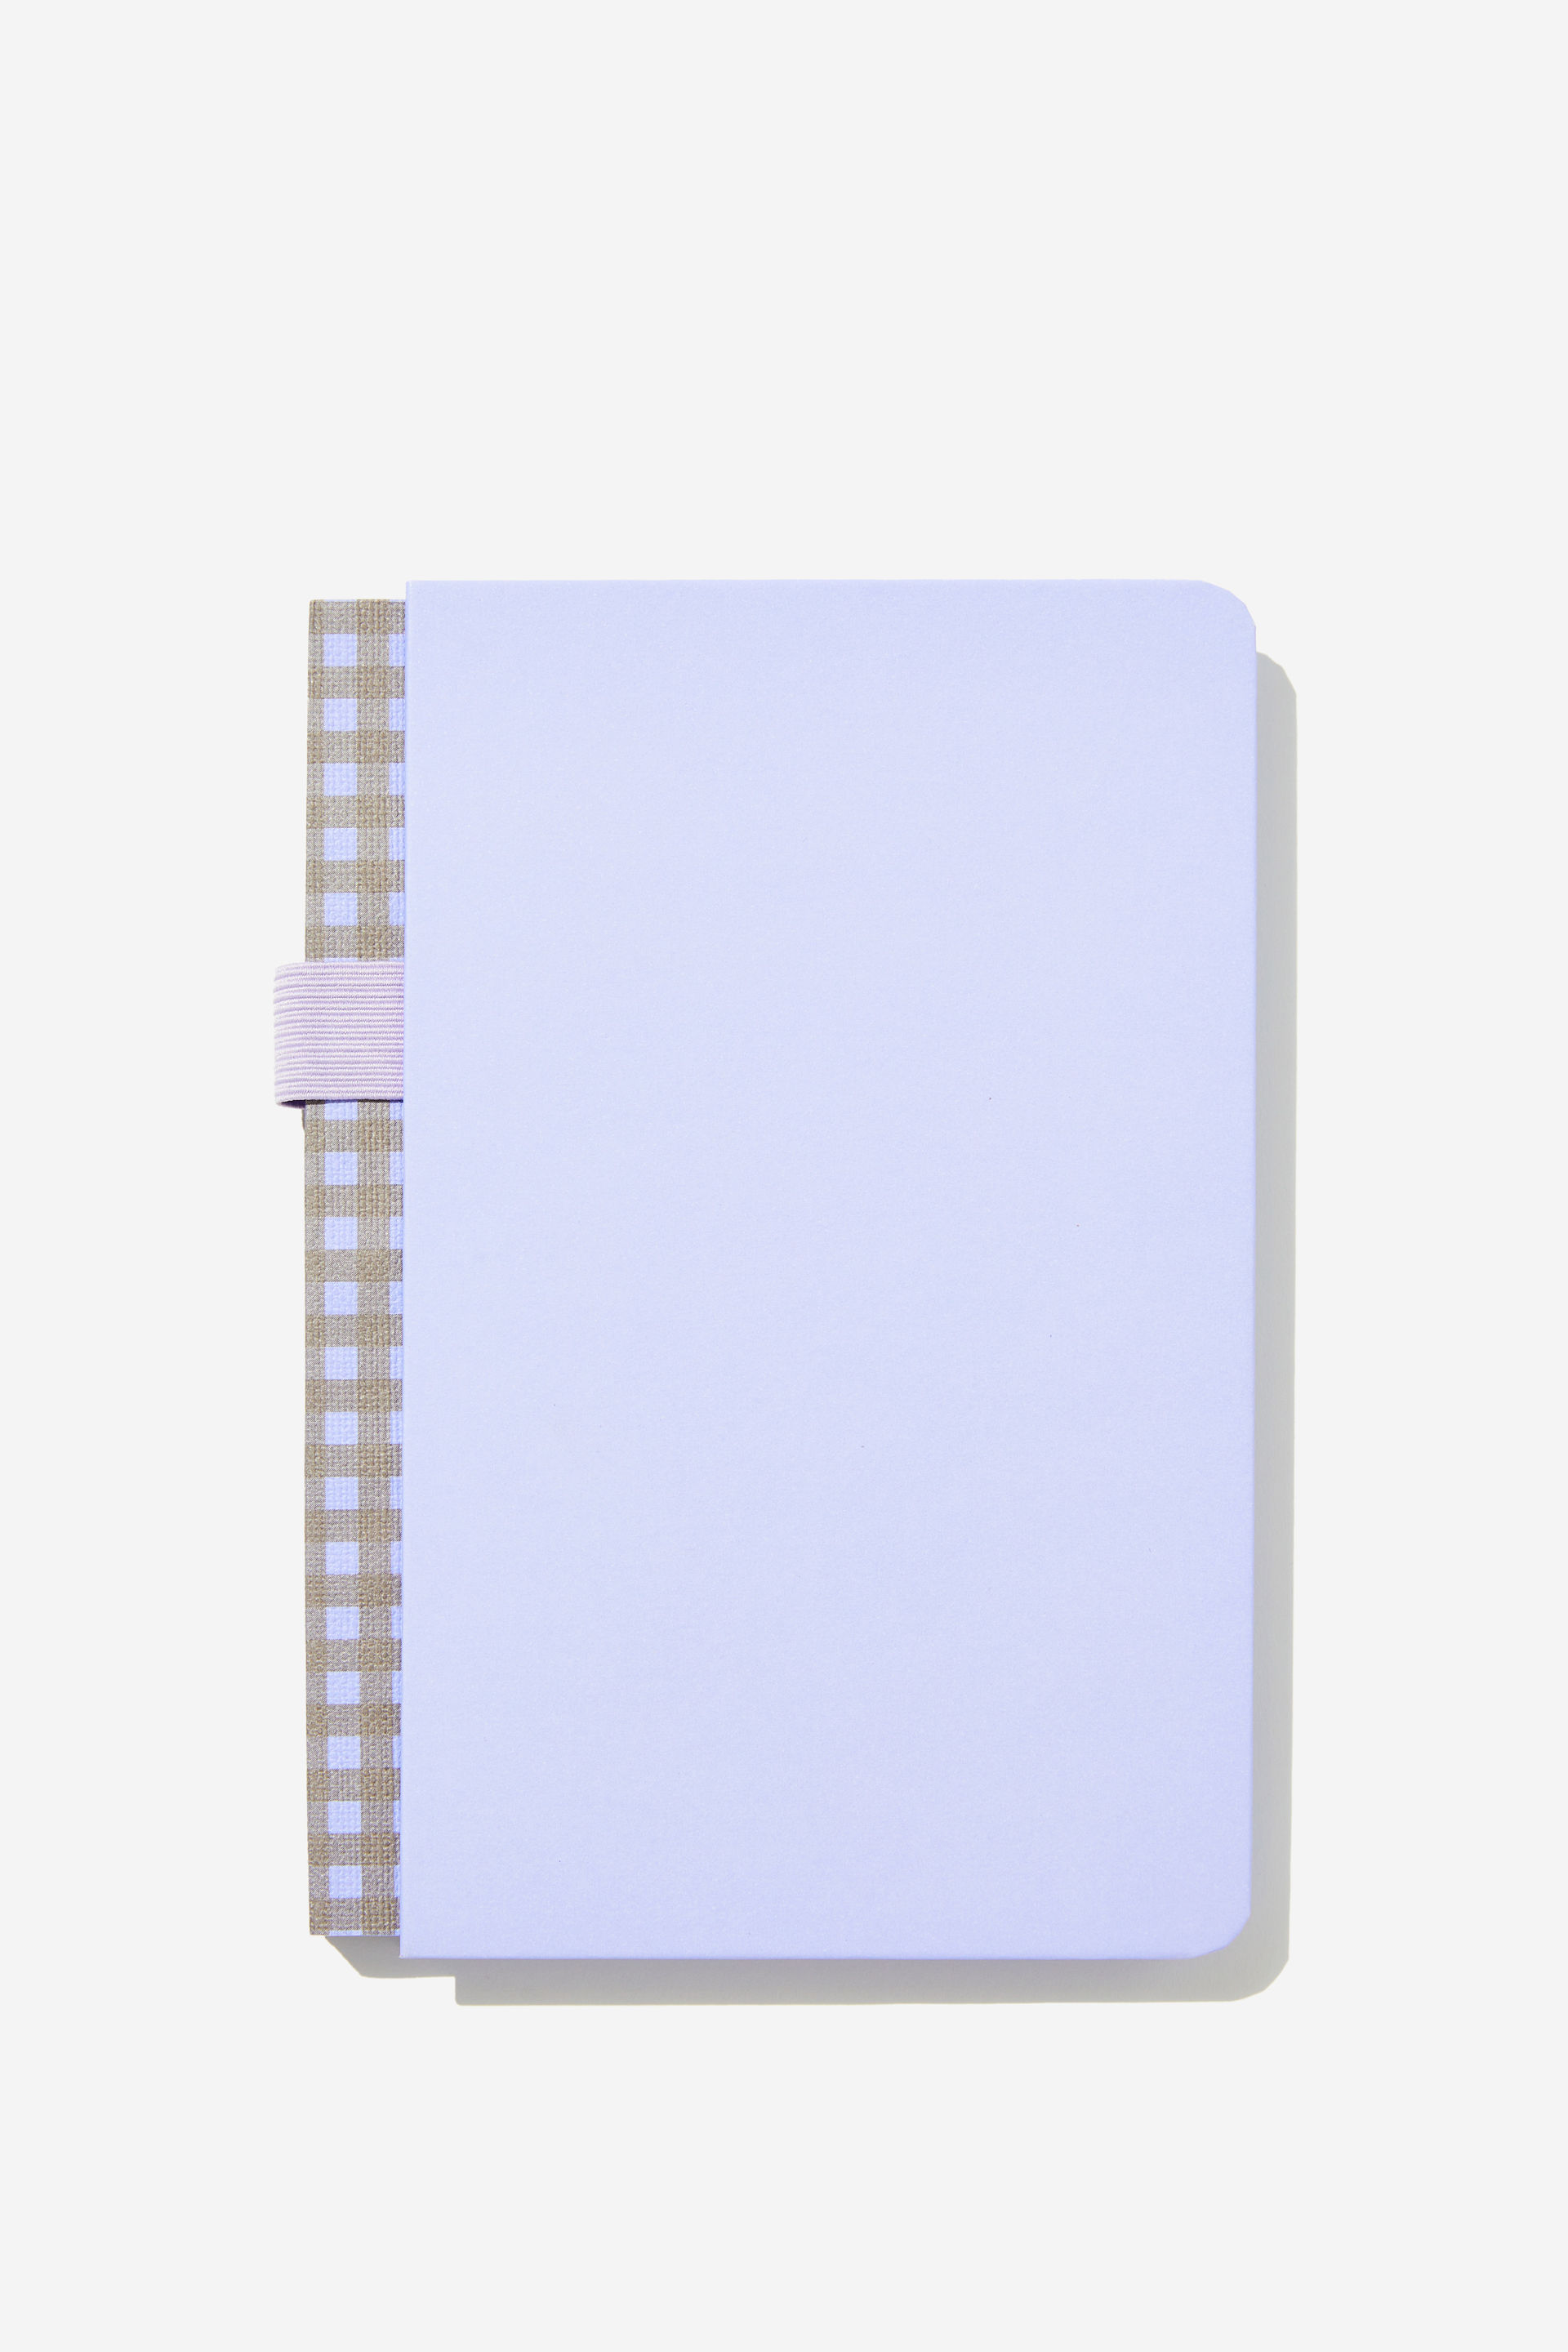 Typo - A5 Parker Notebook - Soft lilac gingham